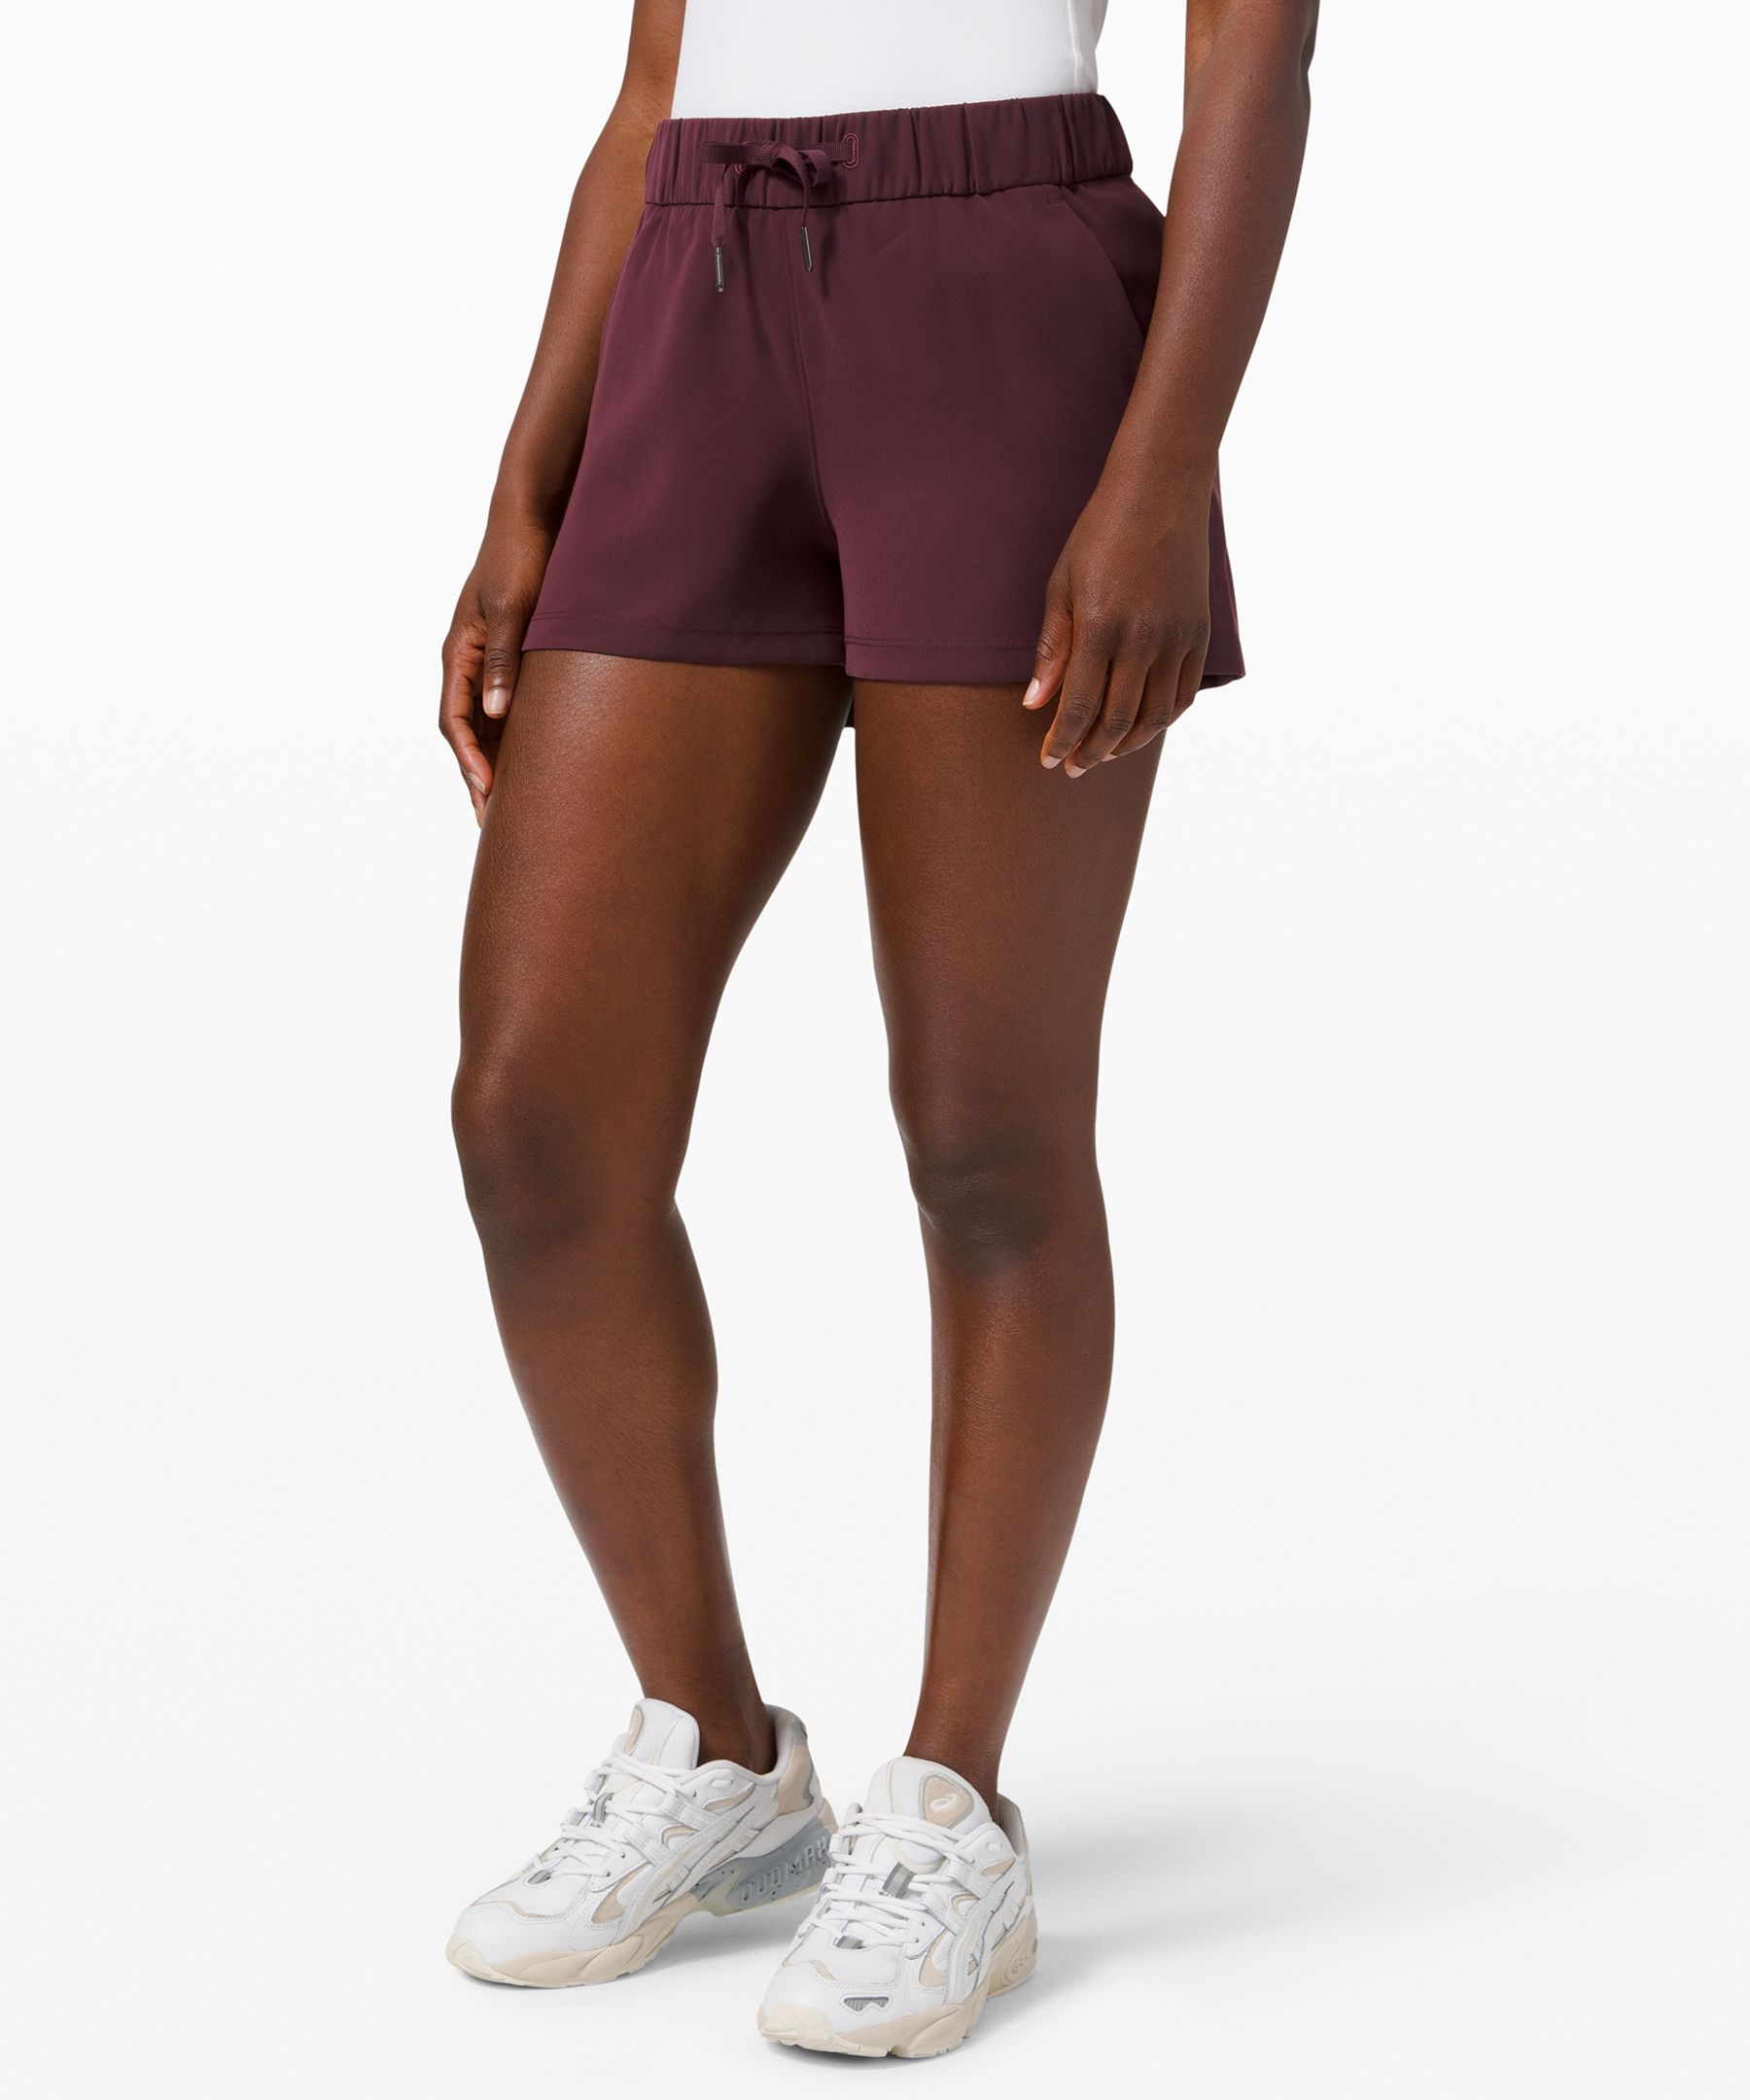 lululemon on the fly shorts review